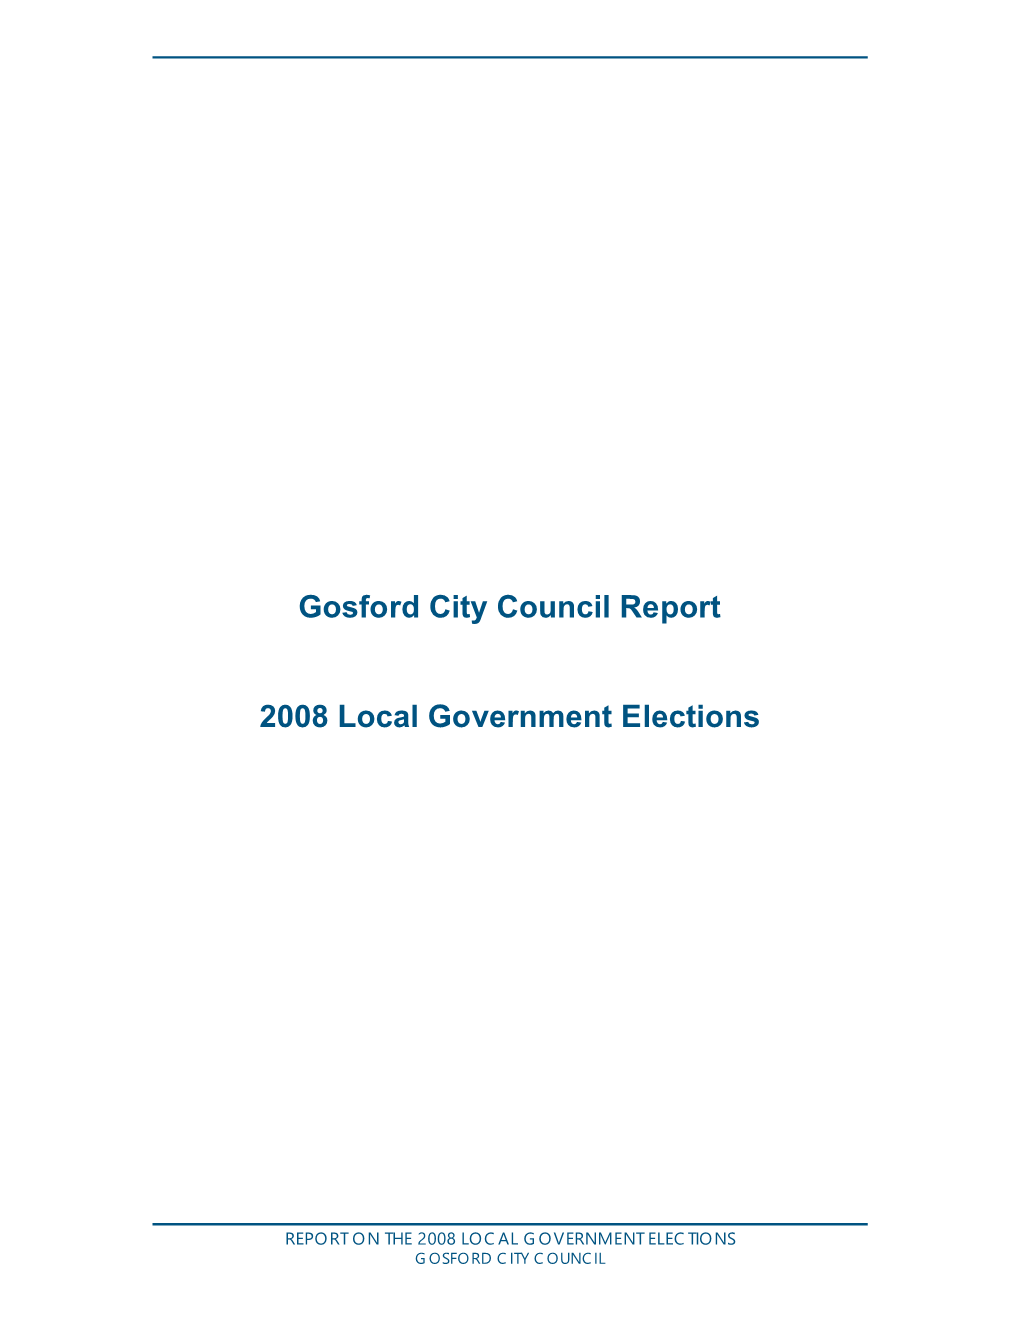 Gosford City Council Report 2008 Local Government Elections